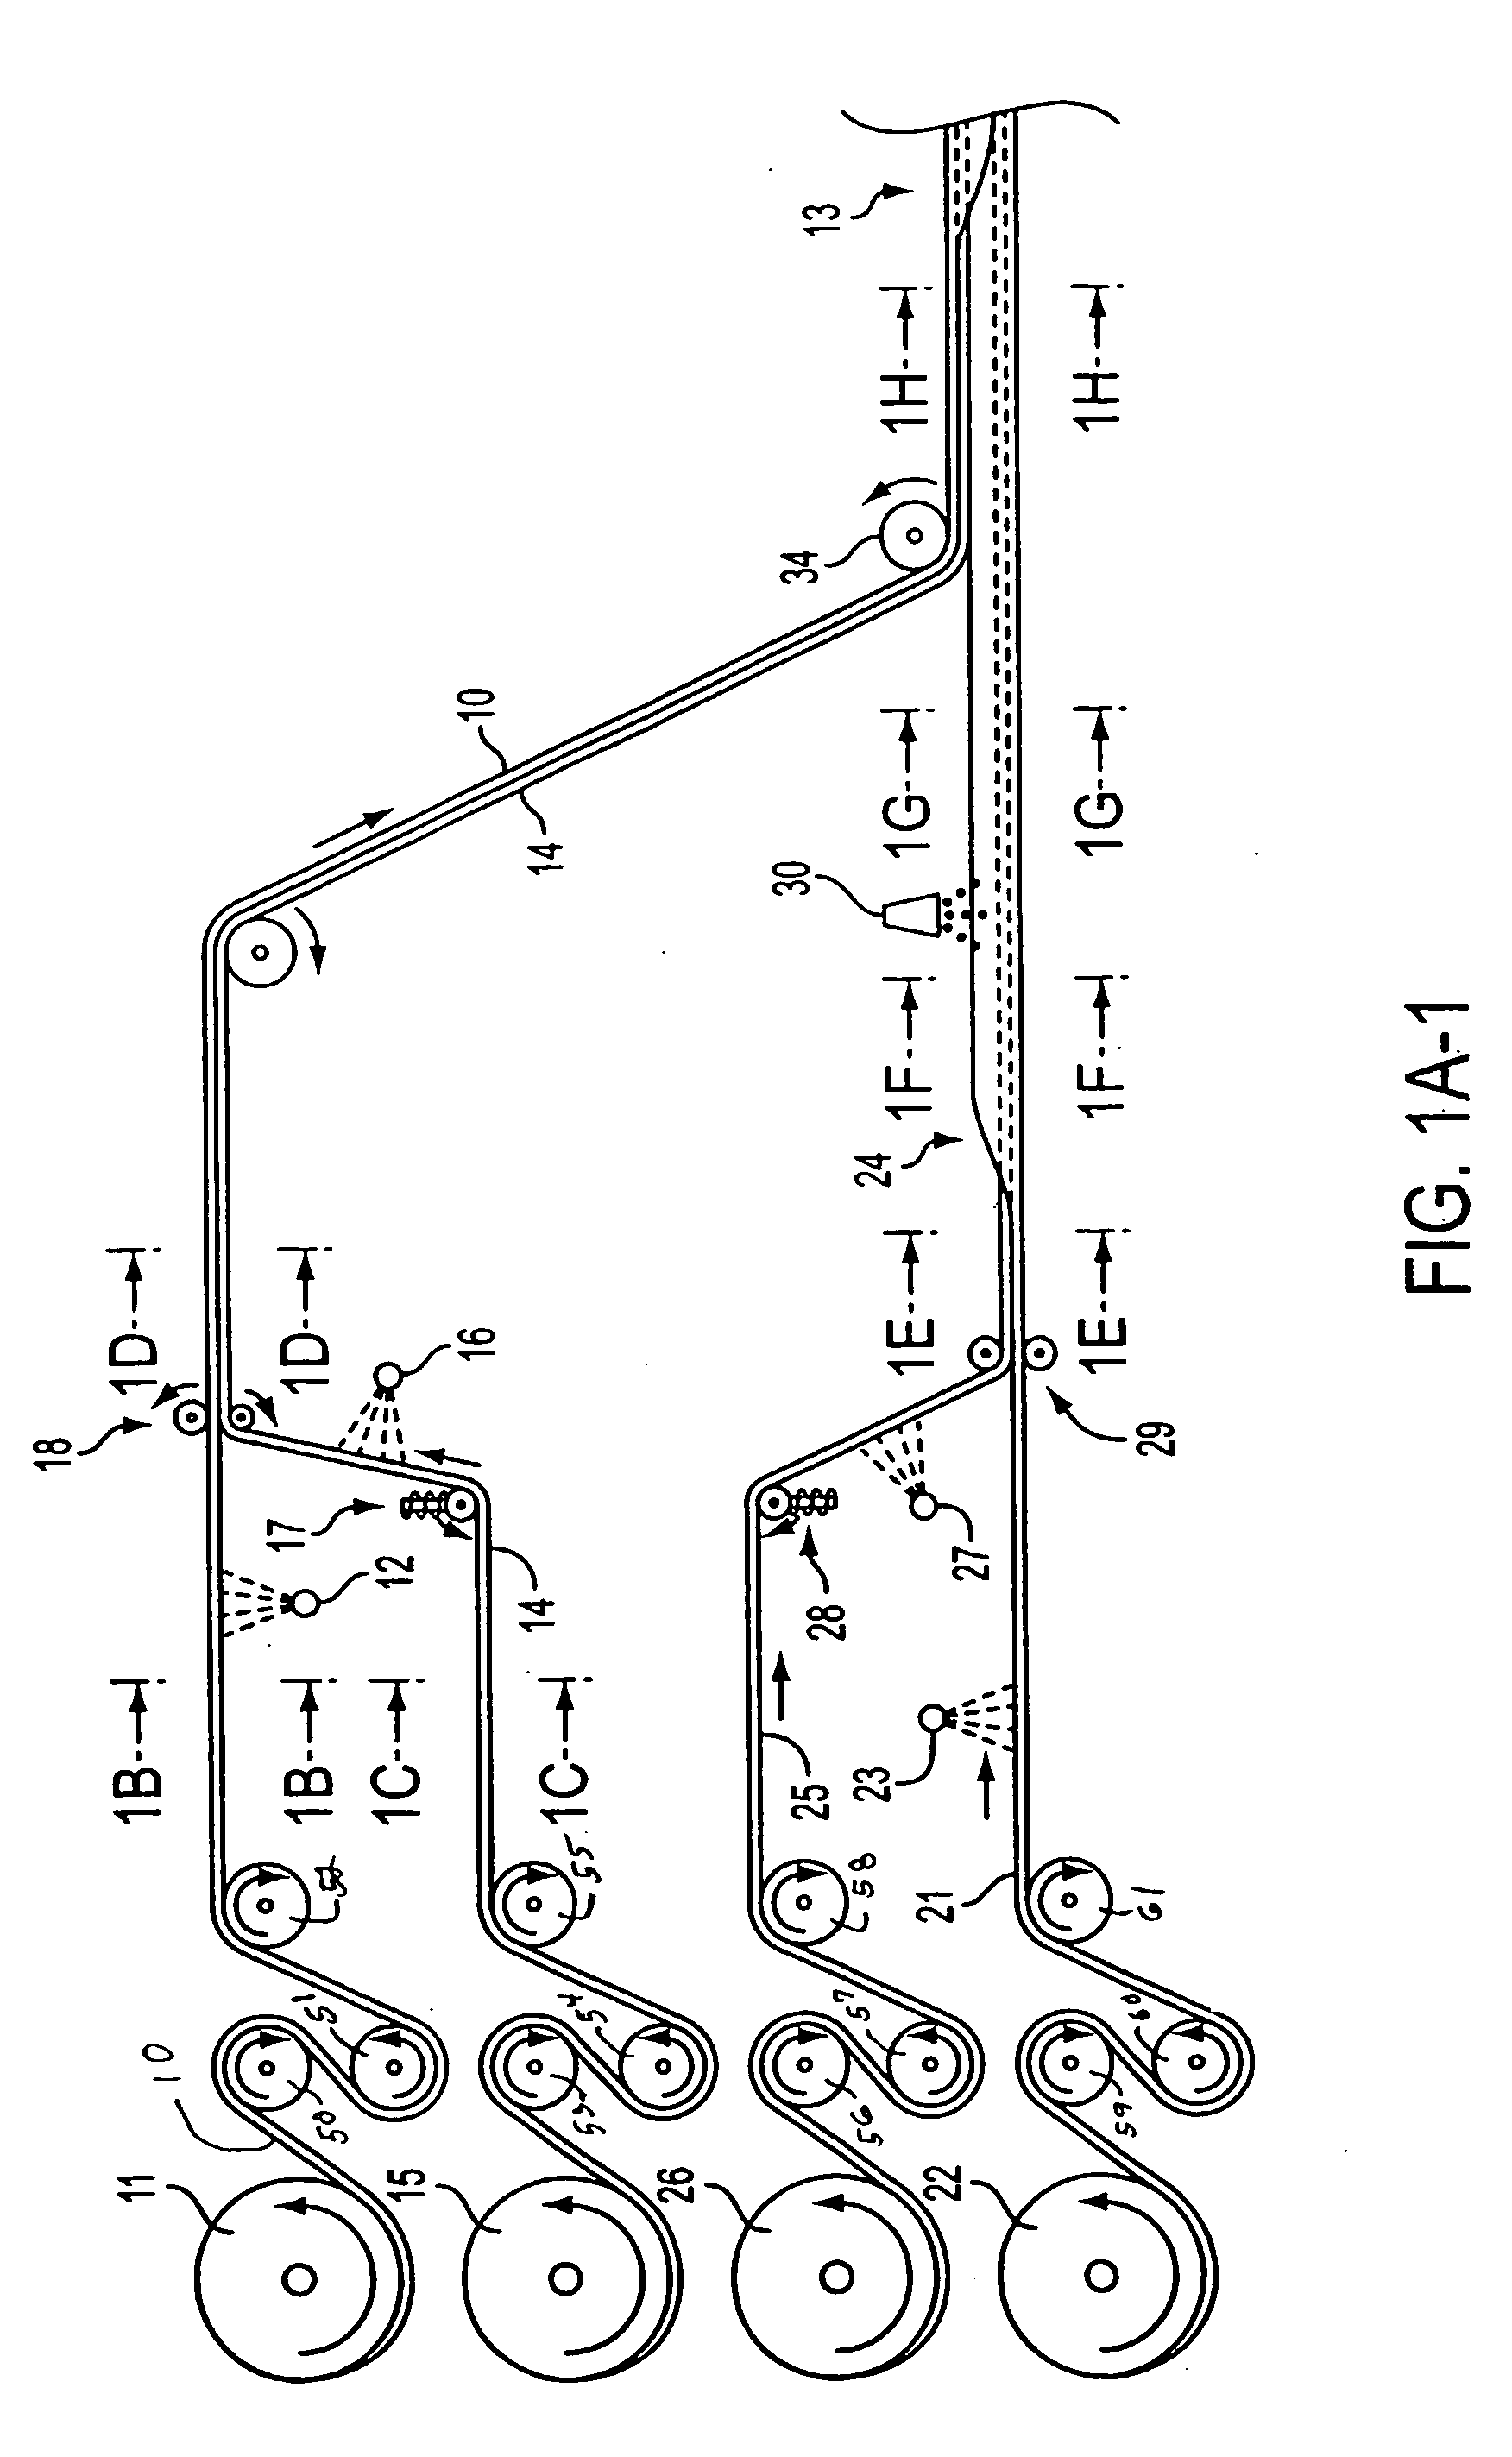 Composite structural material and method of making same